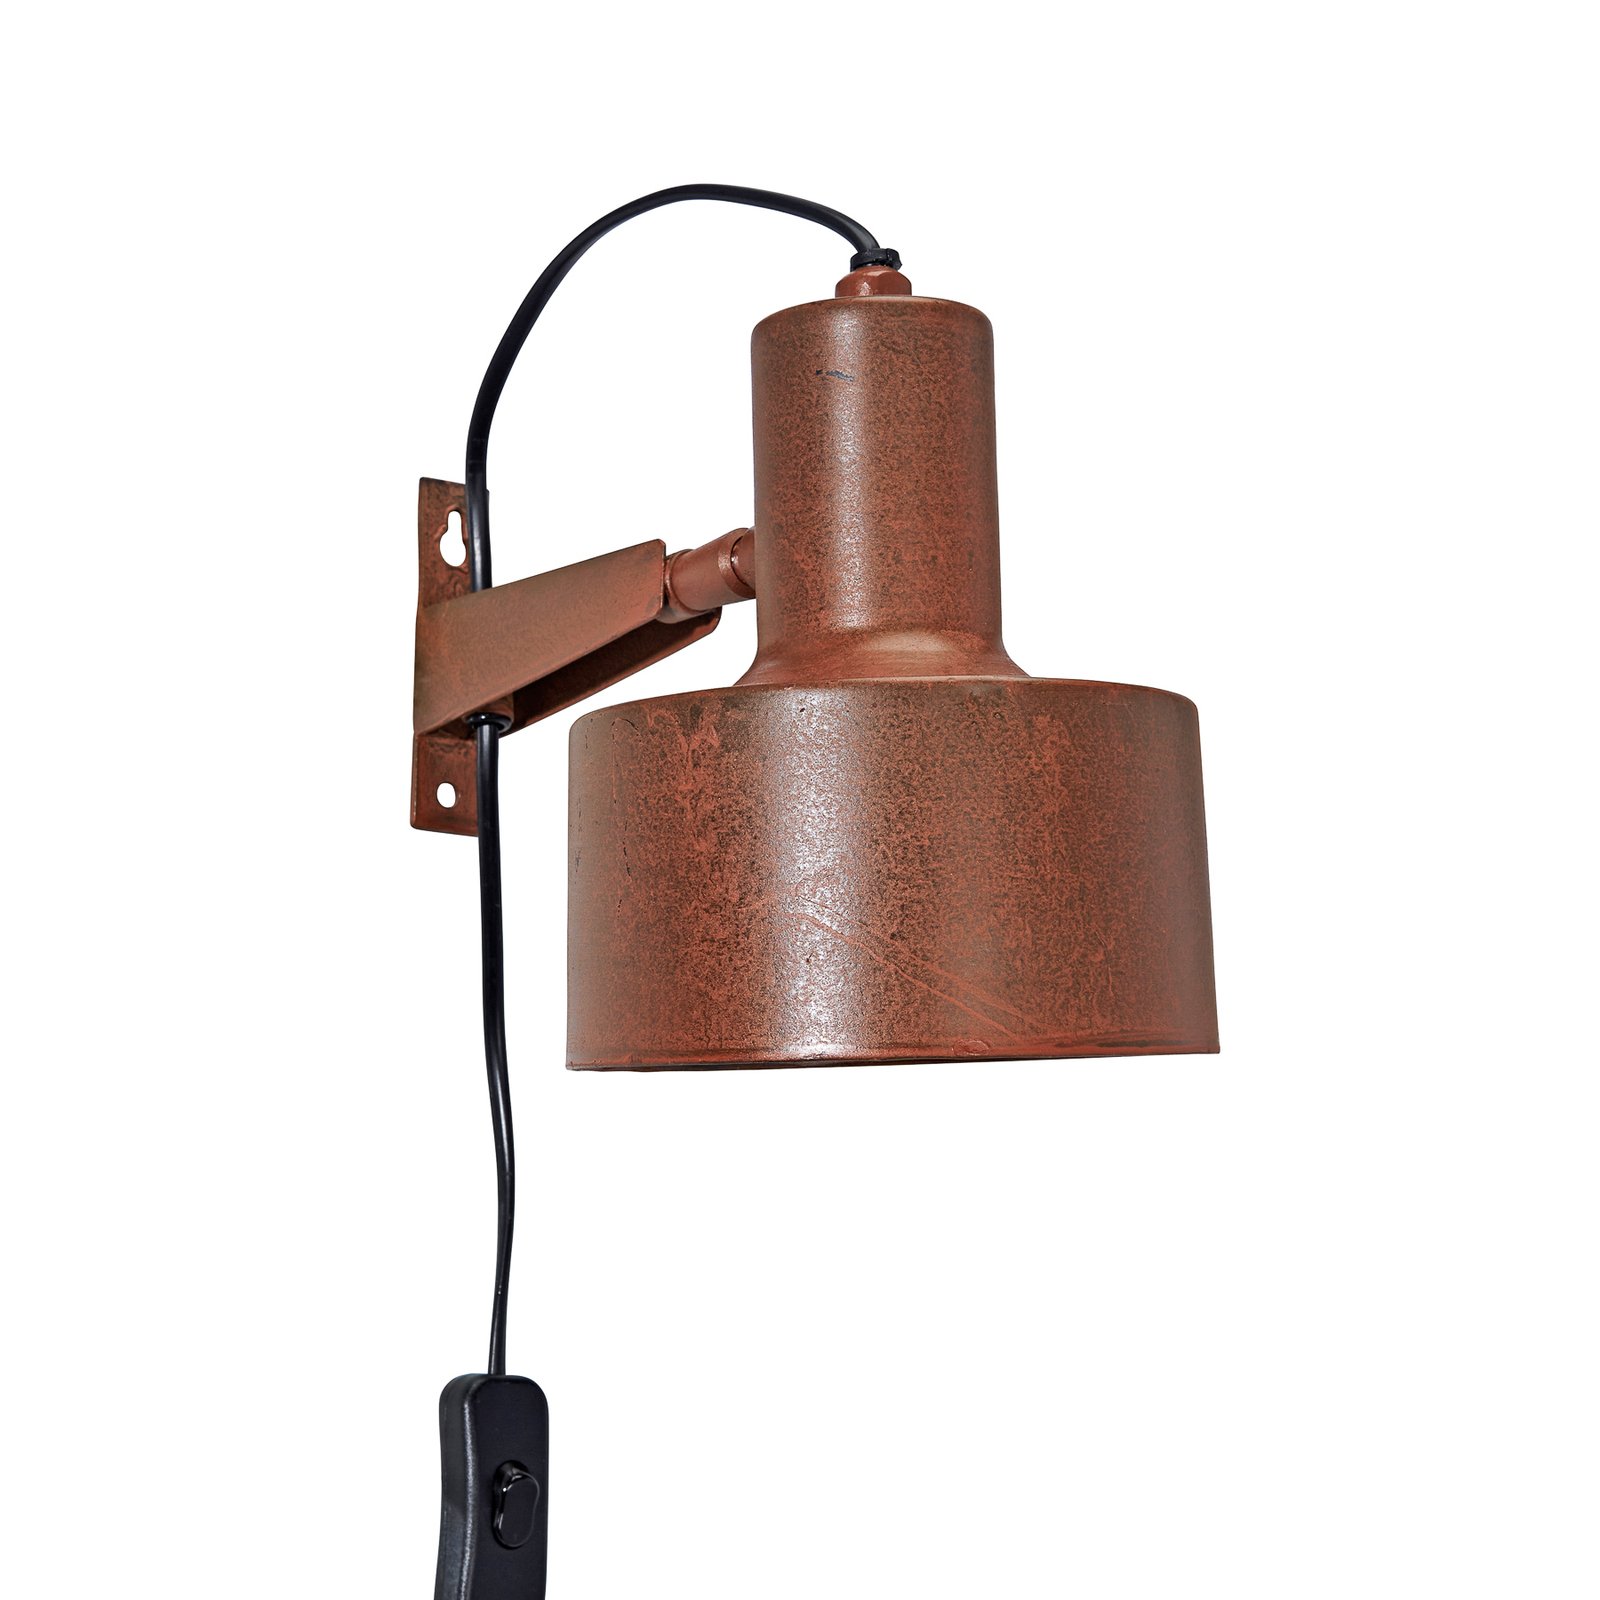 PR Home Solo wall light with a plug, rust